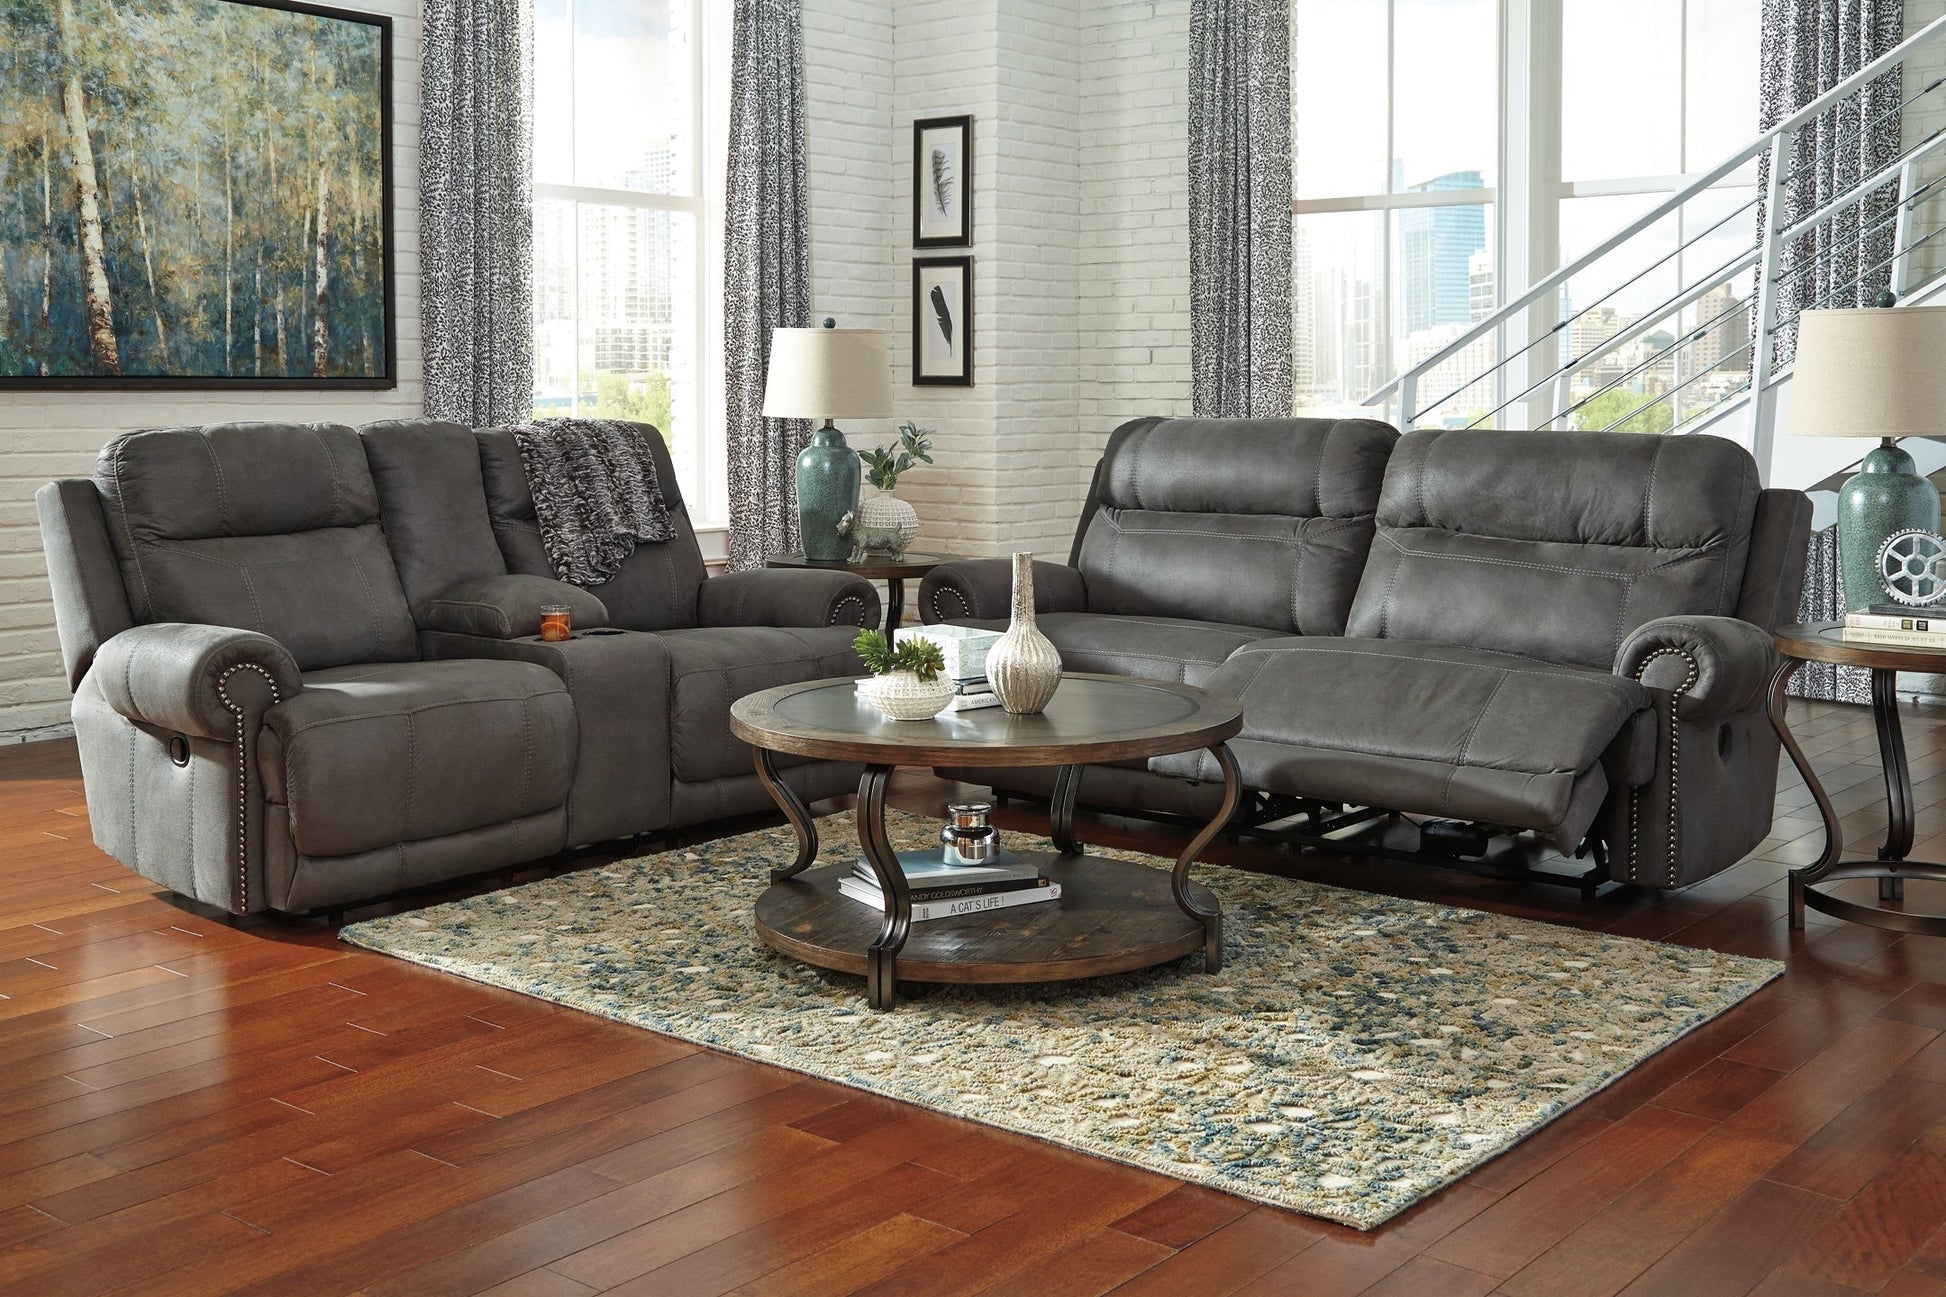 Austere DBL Rec Loveseat w/Console at Towne & Country Furniture (AL) furniture, home furniture, home decor, sofa, bedding